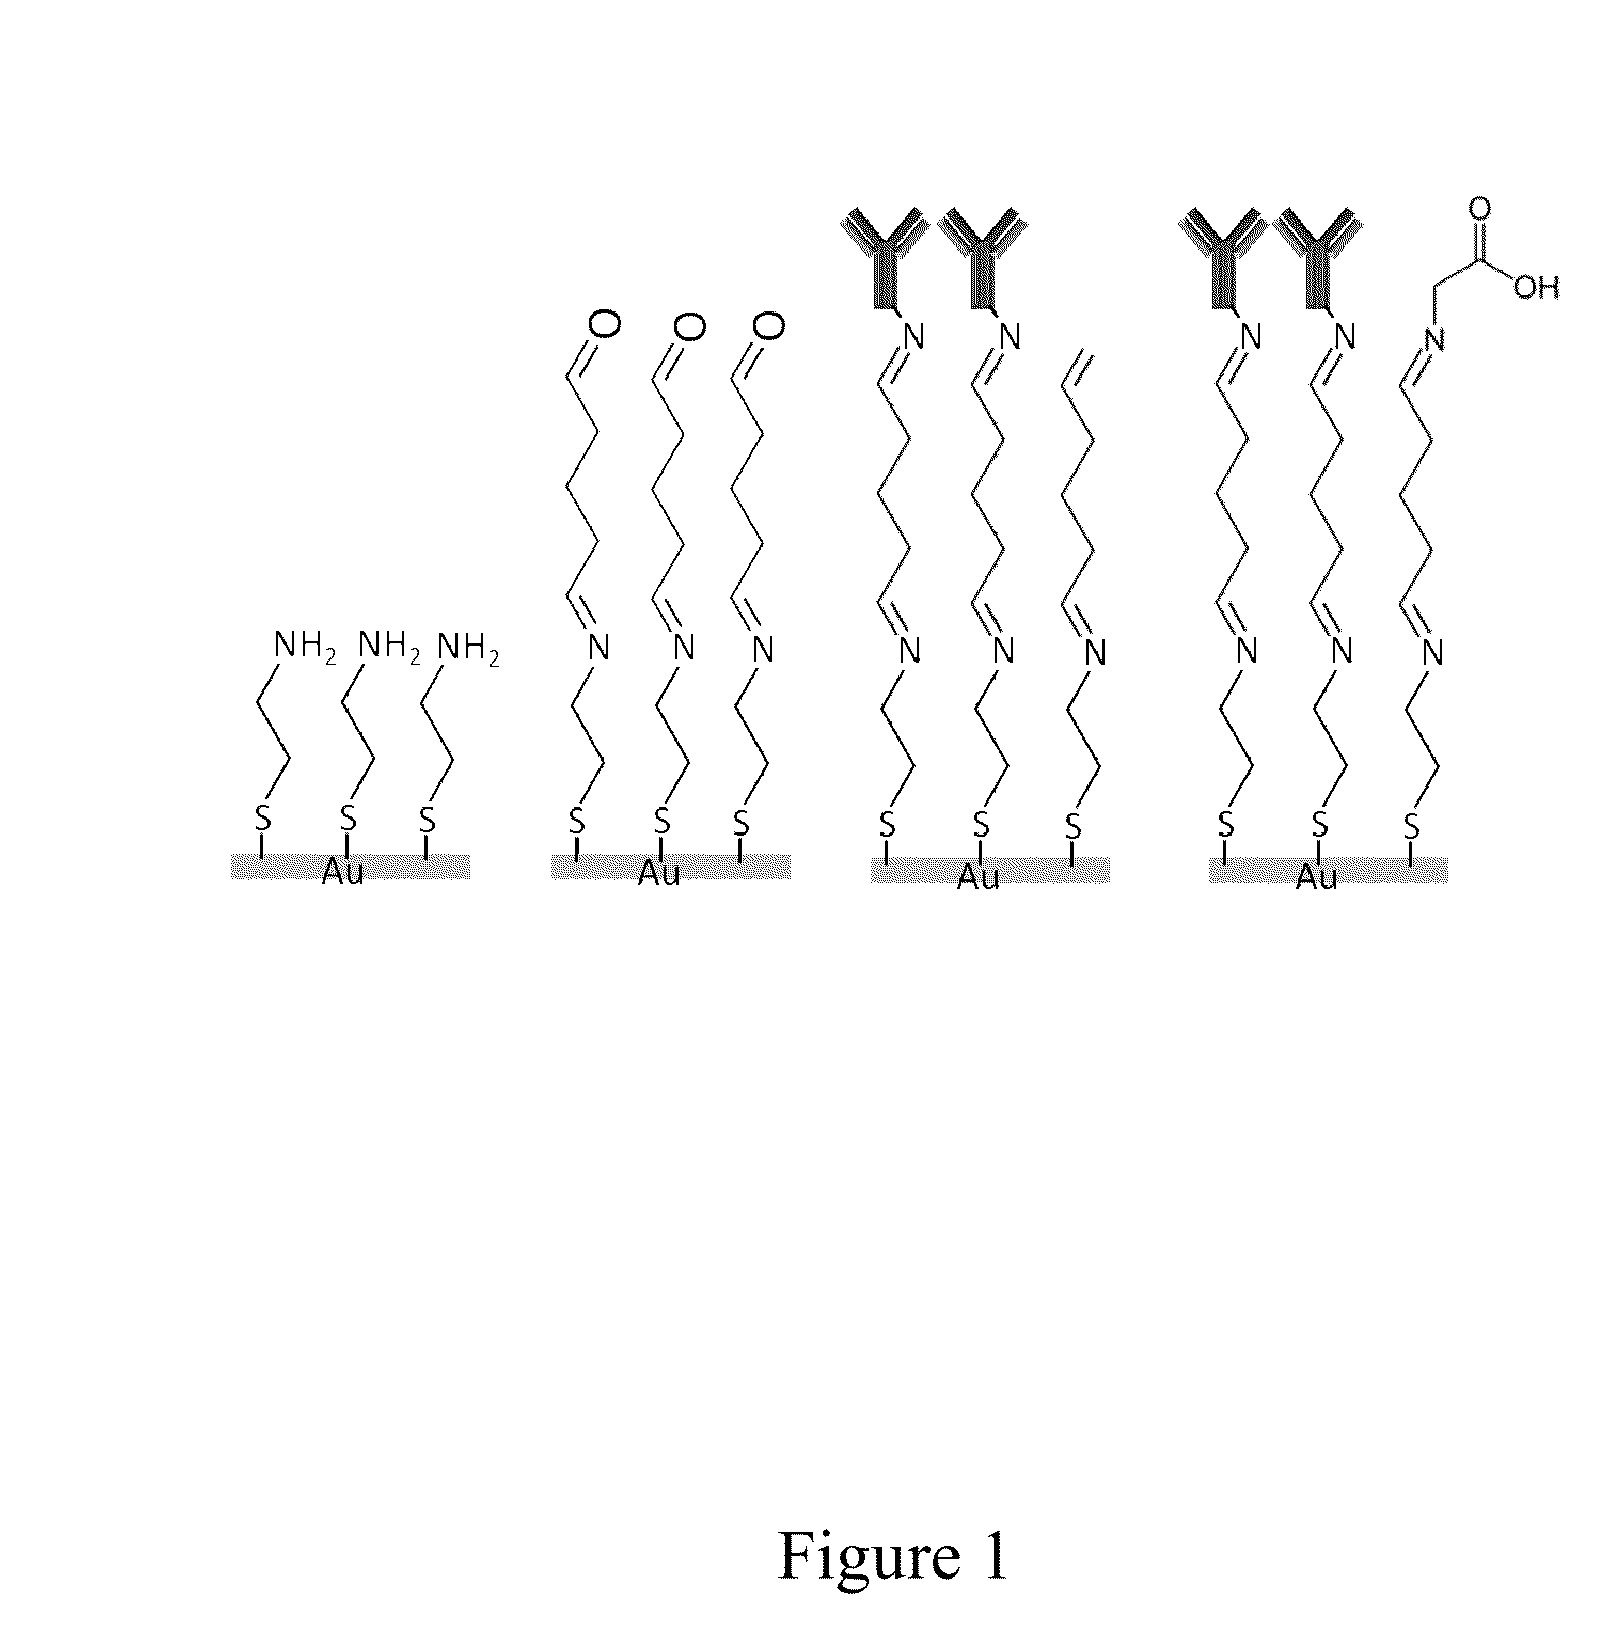 C-reactive protein imprinted polymer film and microchip system utilizing the same